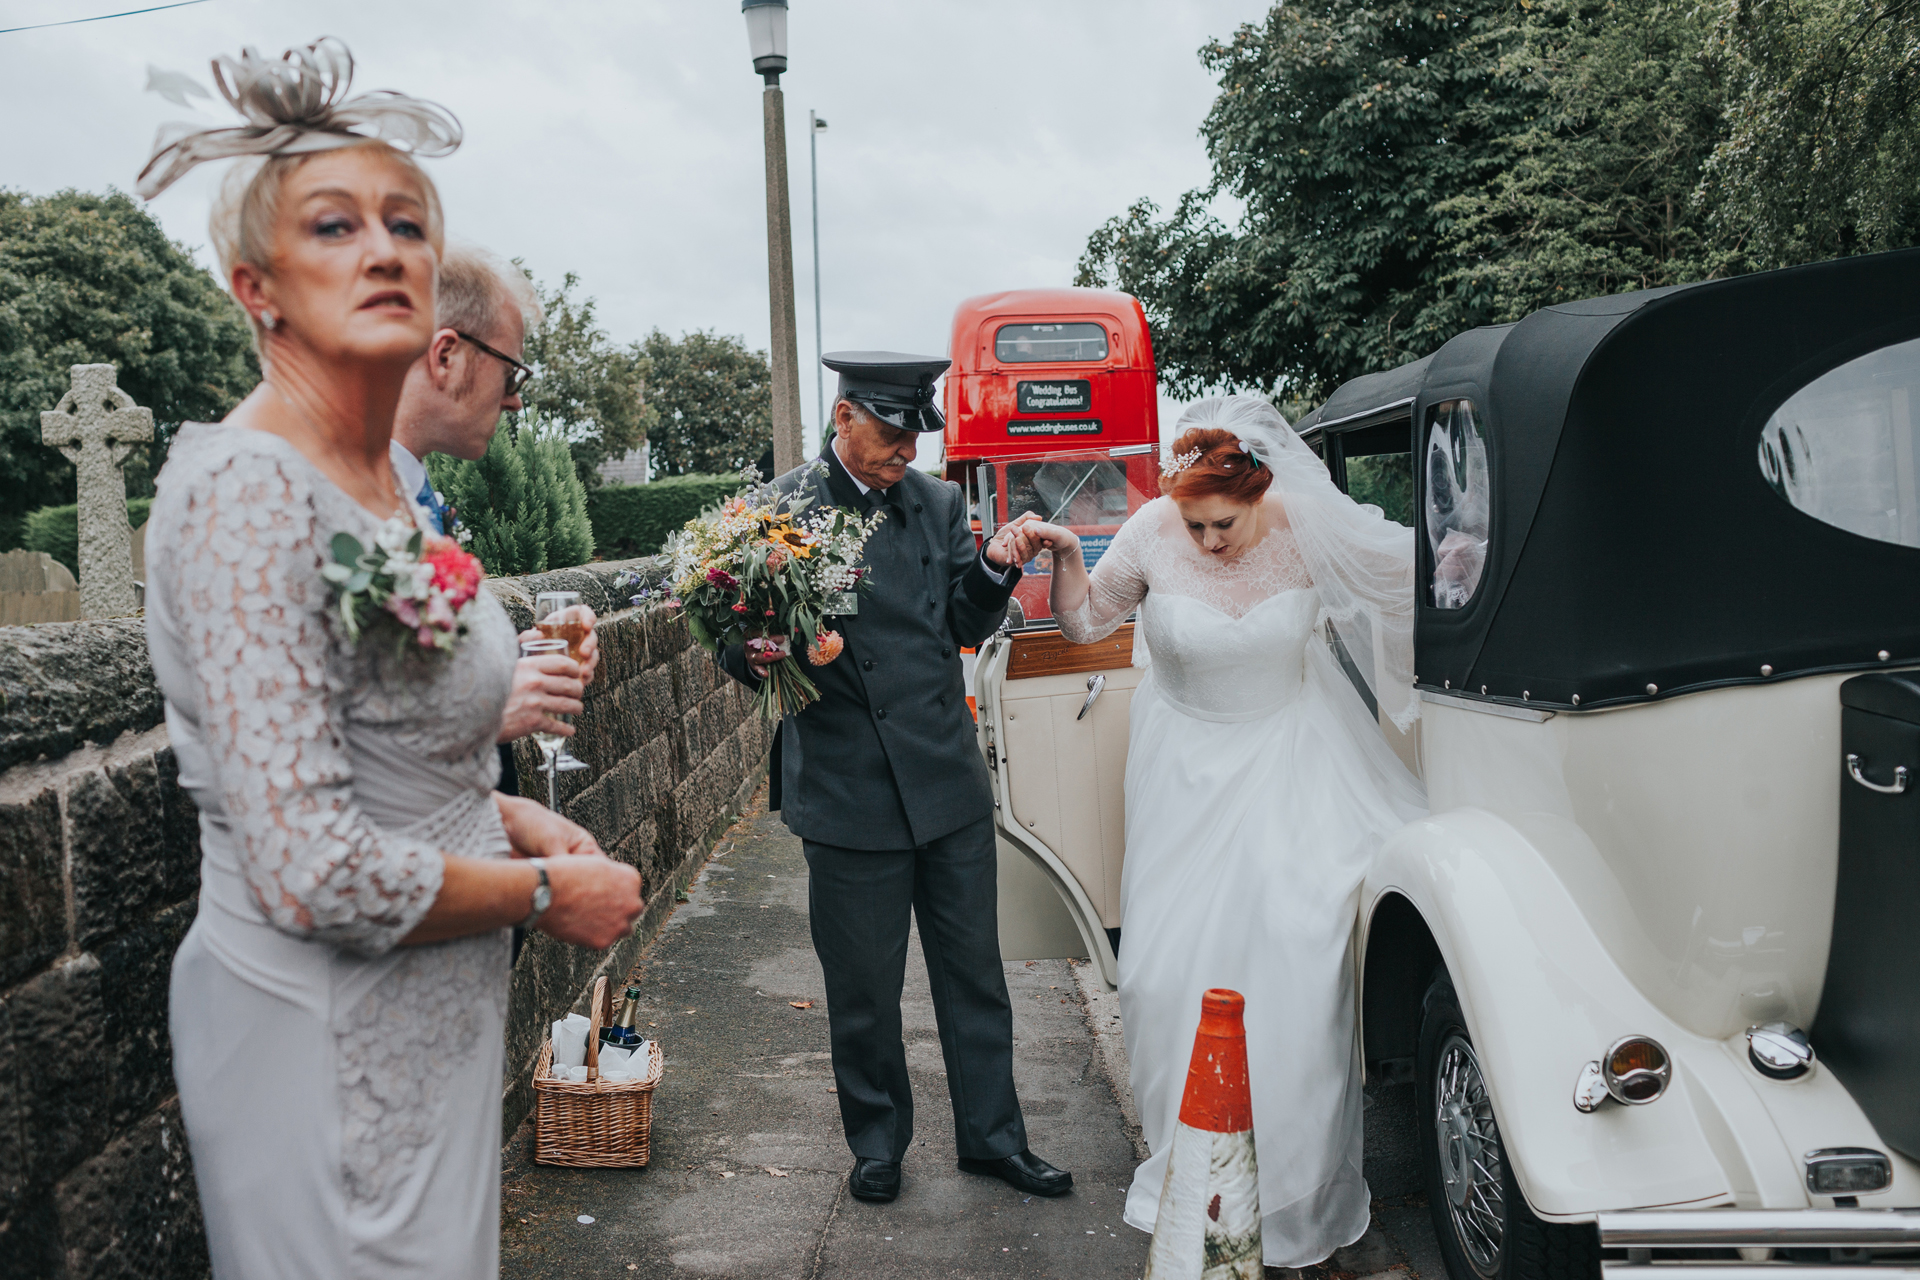 Brides mother waits outside wedding car as bride is helped into it by driver, big red bus in the back ground. 